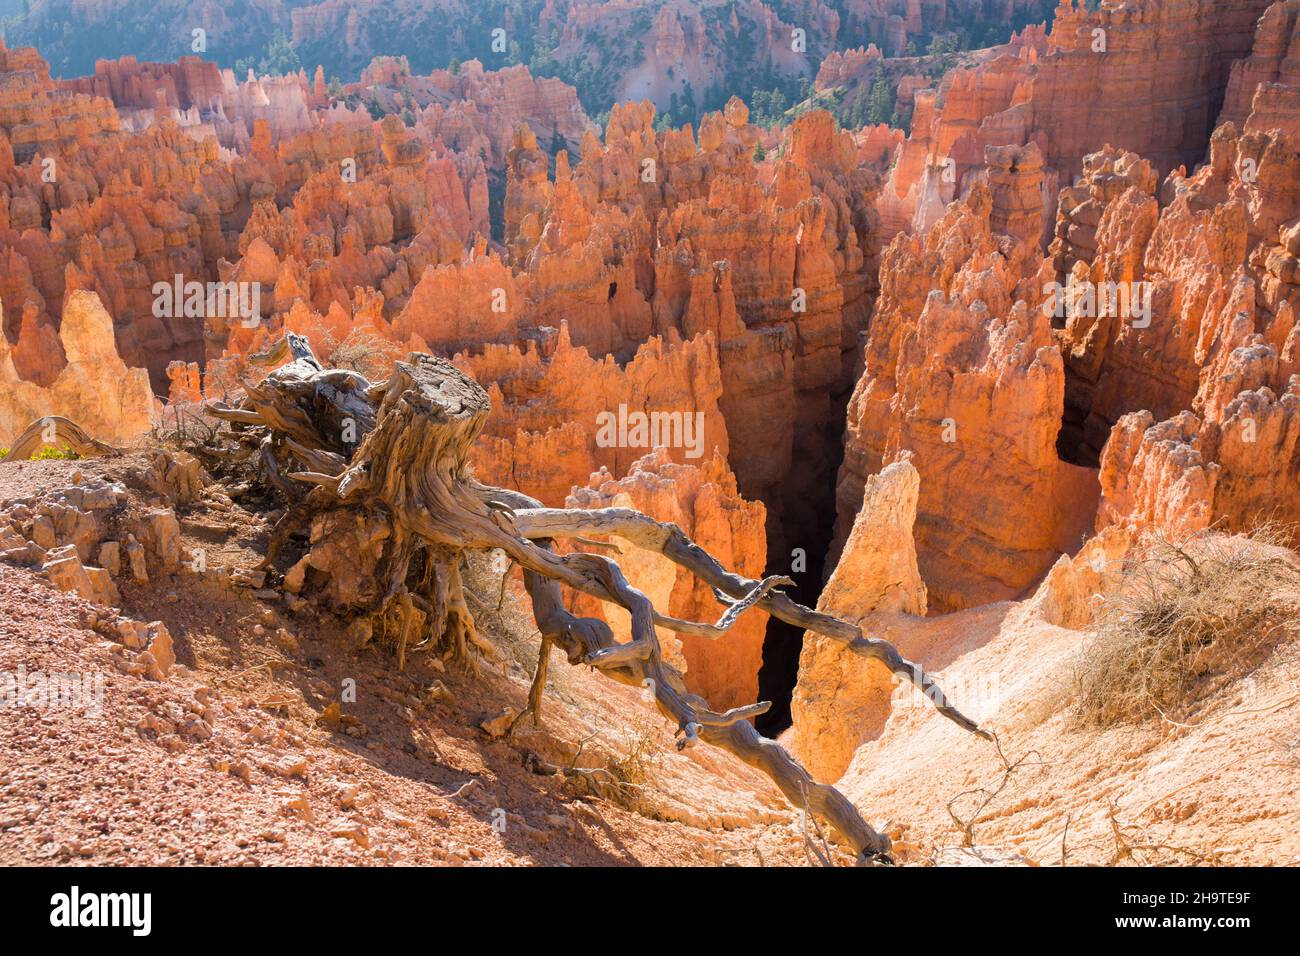 Bryce Canyon National Park, Utah, USA. View over the Silent City from the Rim Trail near Sunset Point, sunrise, tree roots clinging to cliff edge. Stock Photo